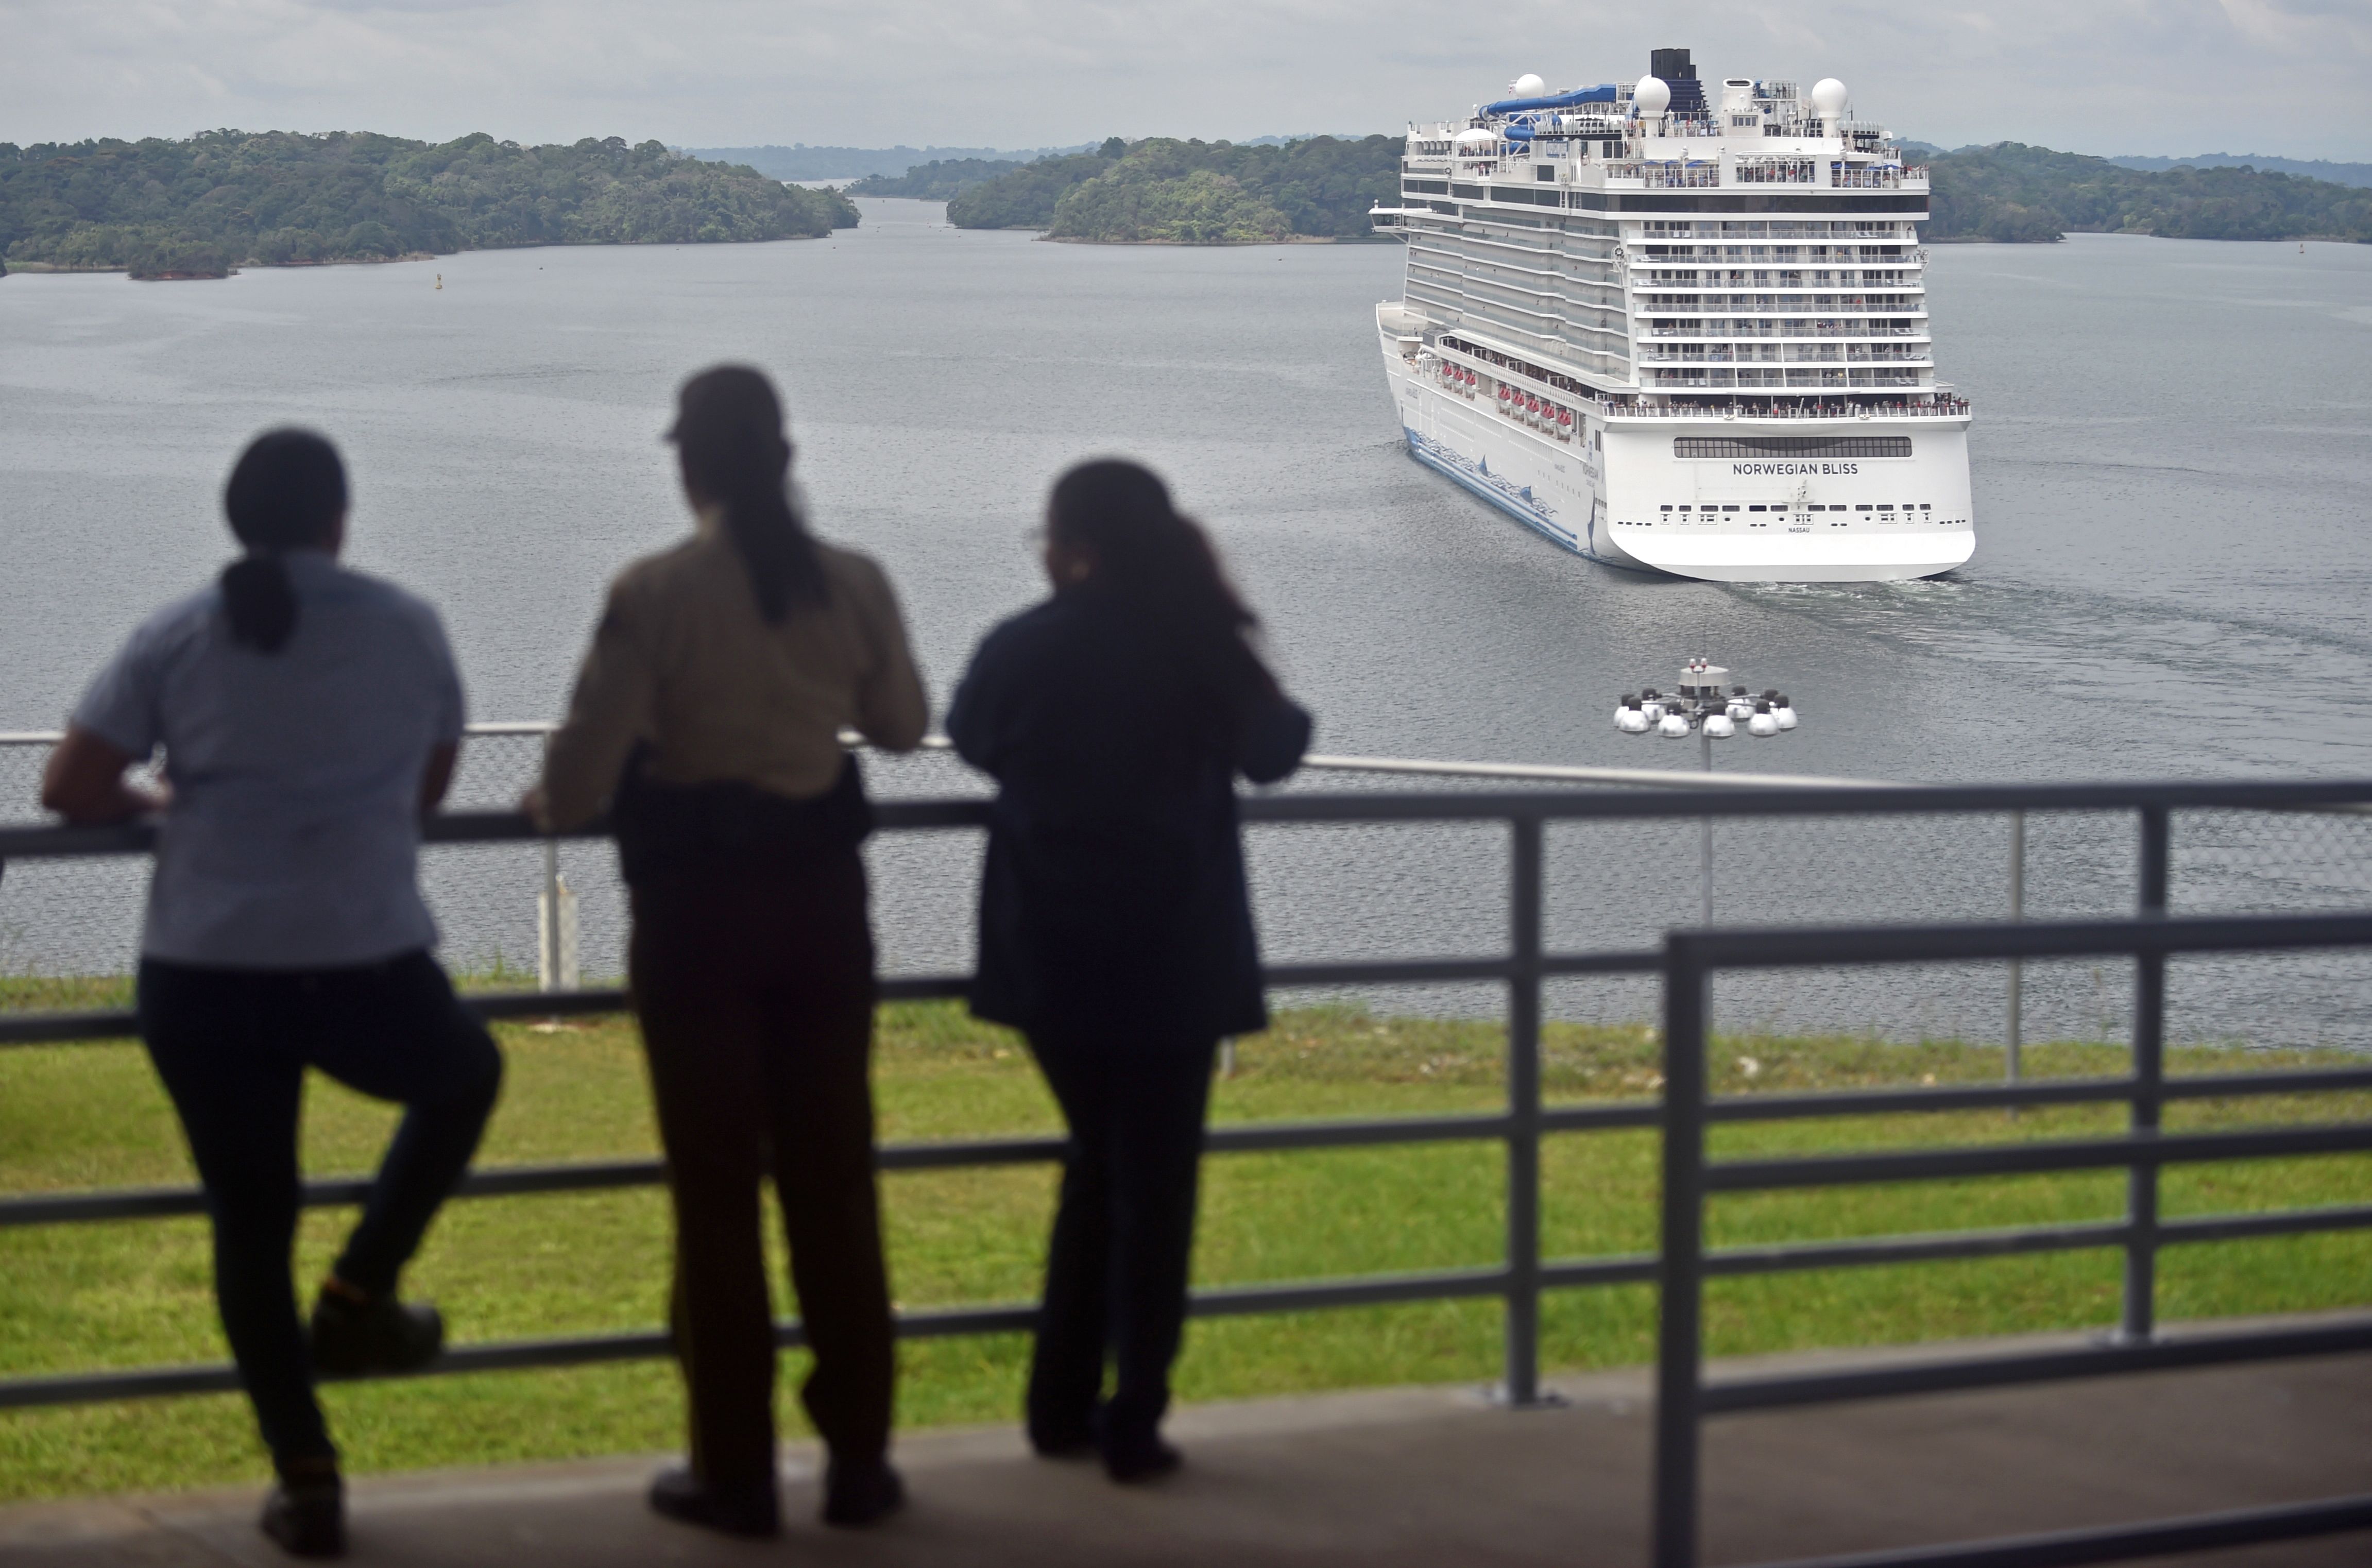 People look at a cruise ship crossing the Panama Canal in the Agua Clara locks in Colon 80 km northwest from Panama City. (RODRIGO ARANGUA—AFP/Getty Images)